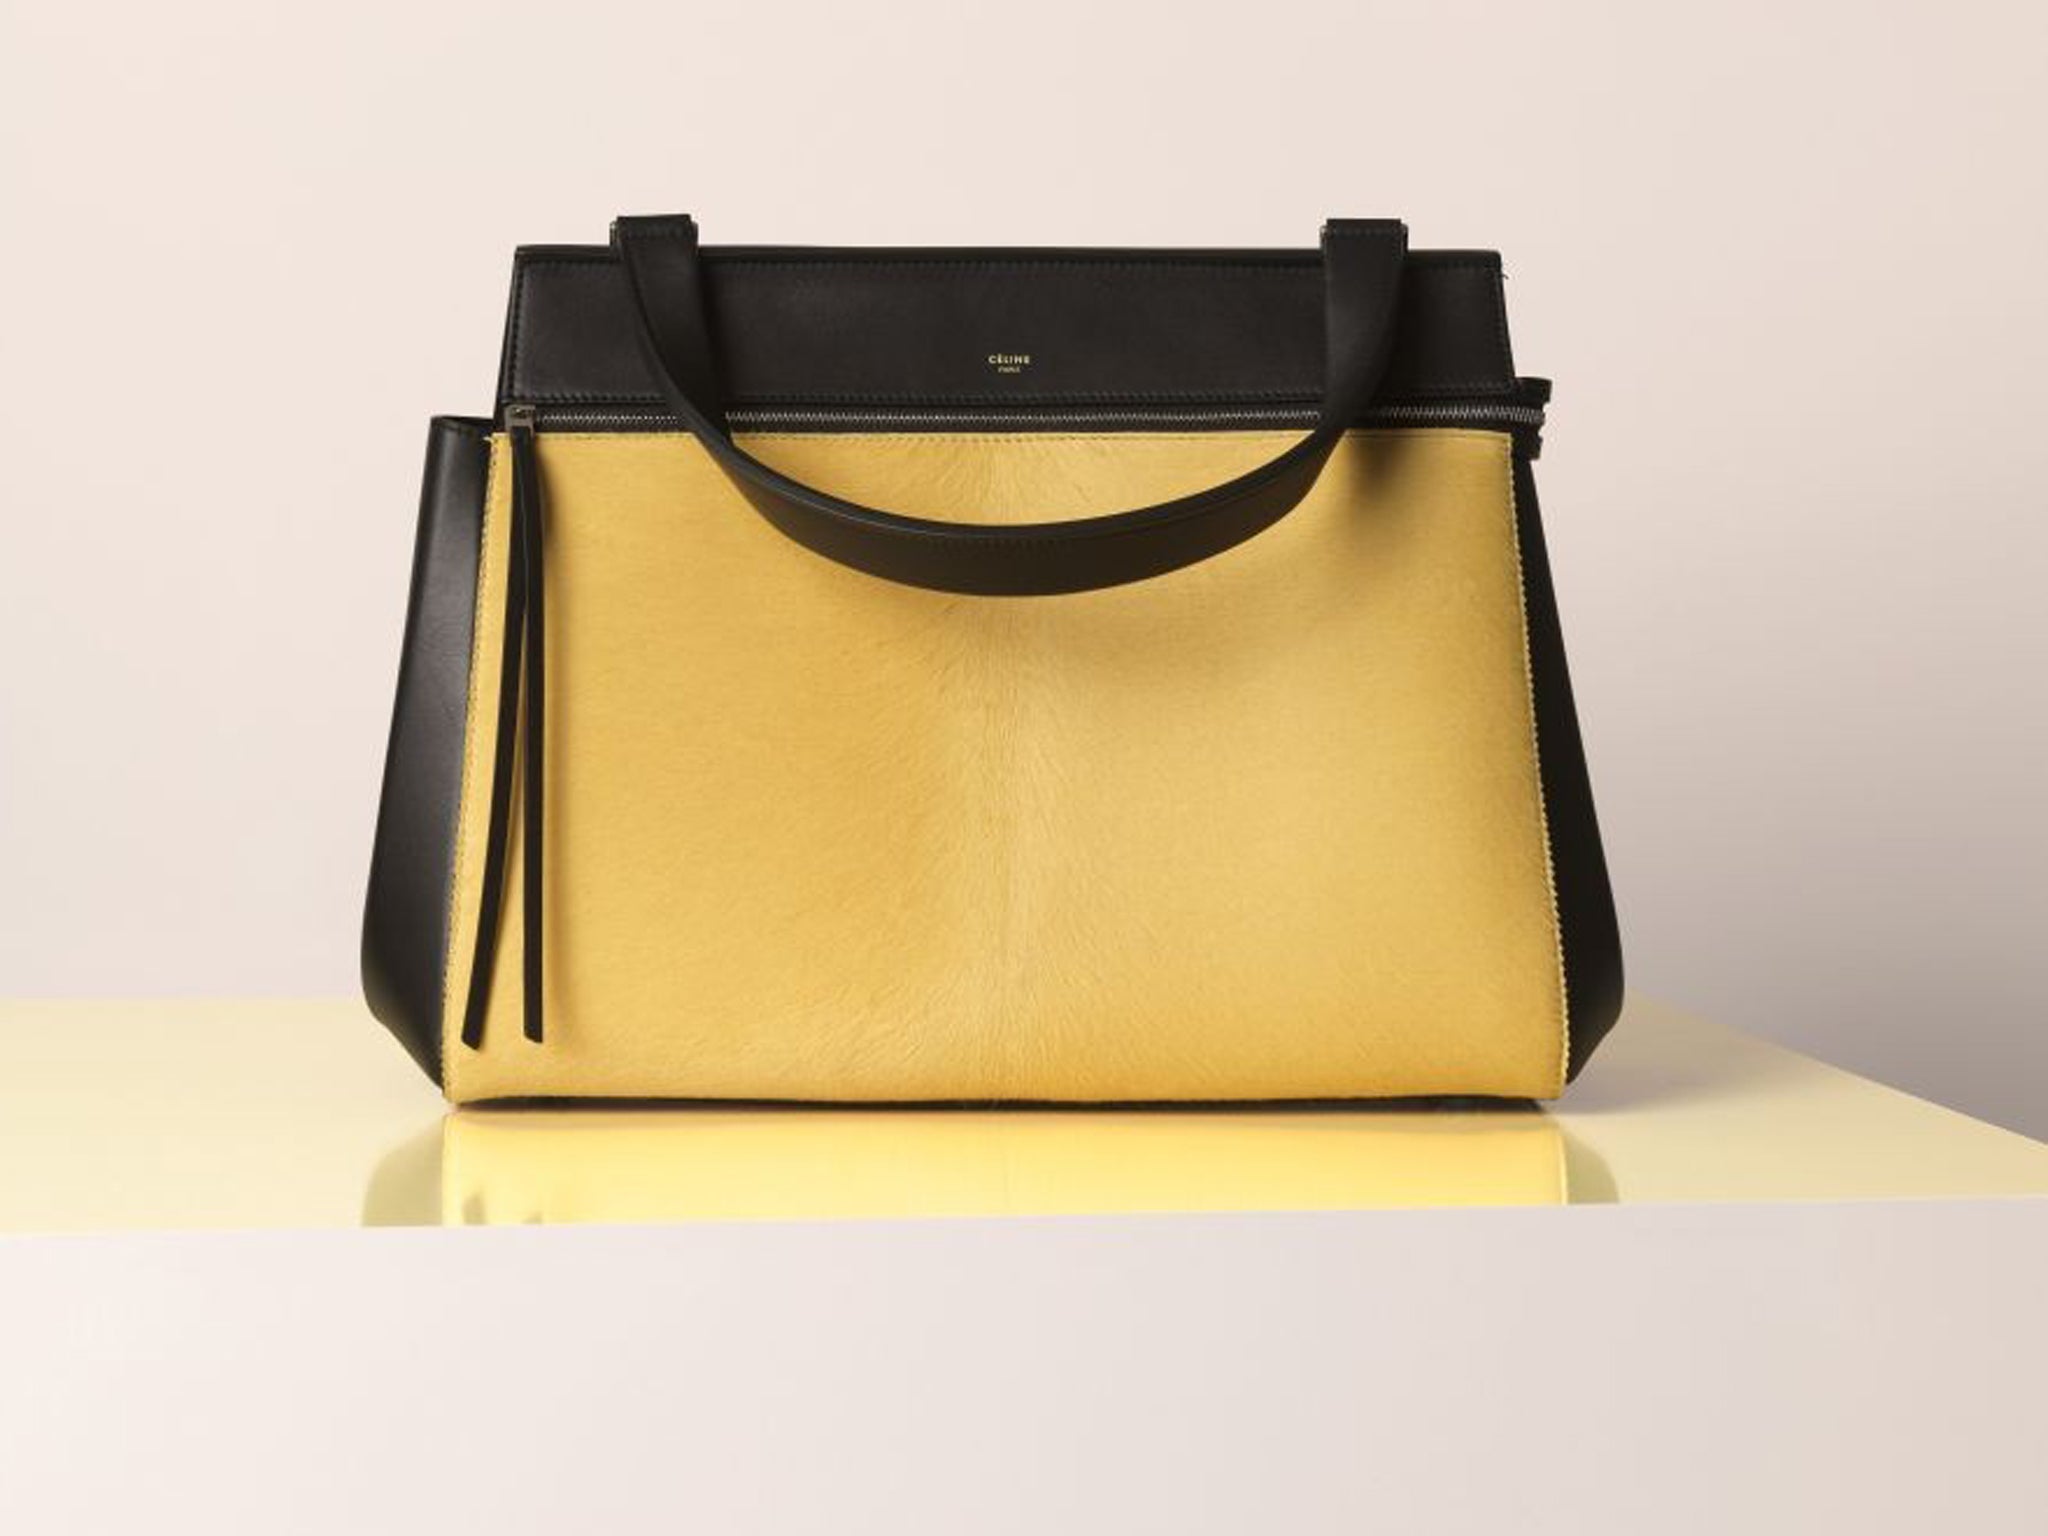 The 10 Best designer handbags | Features | Lifestyle | The Independent